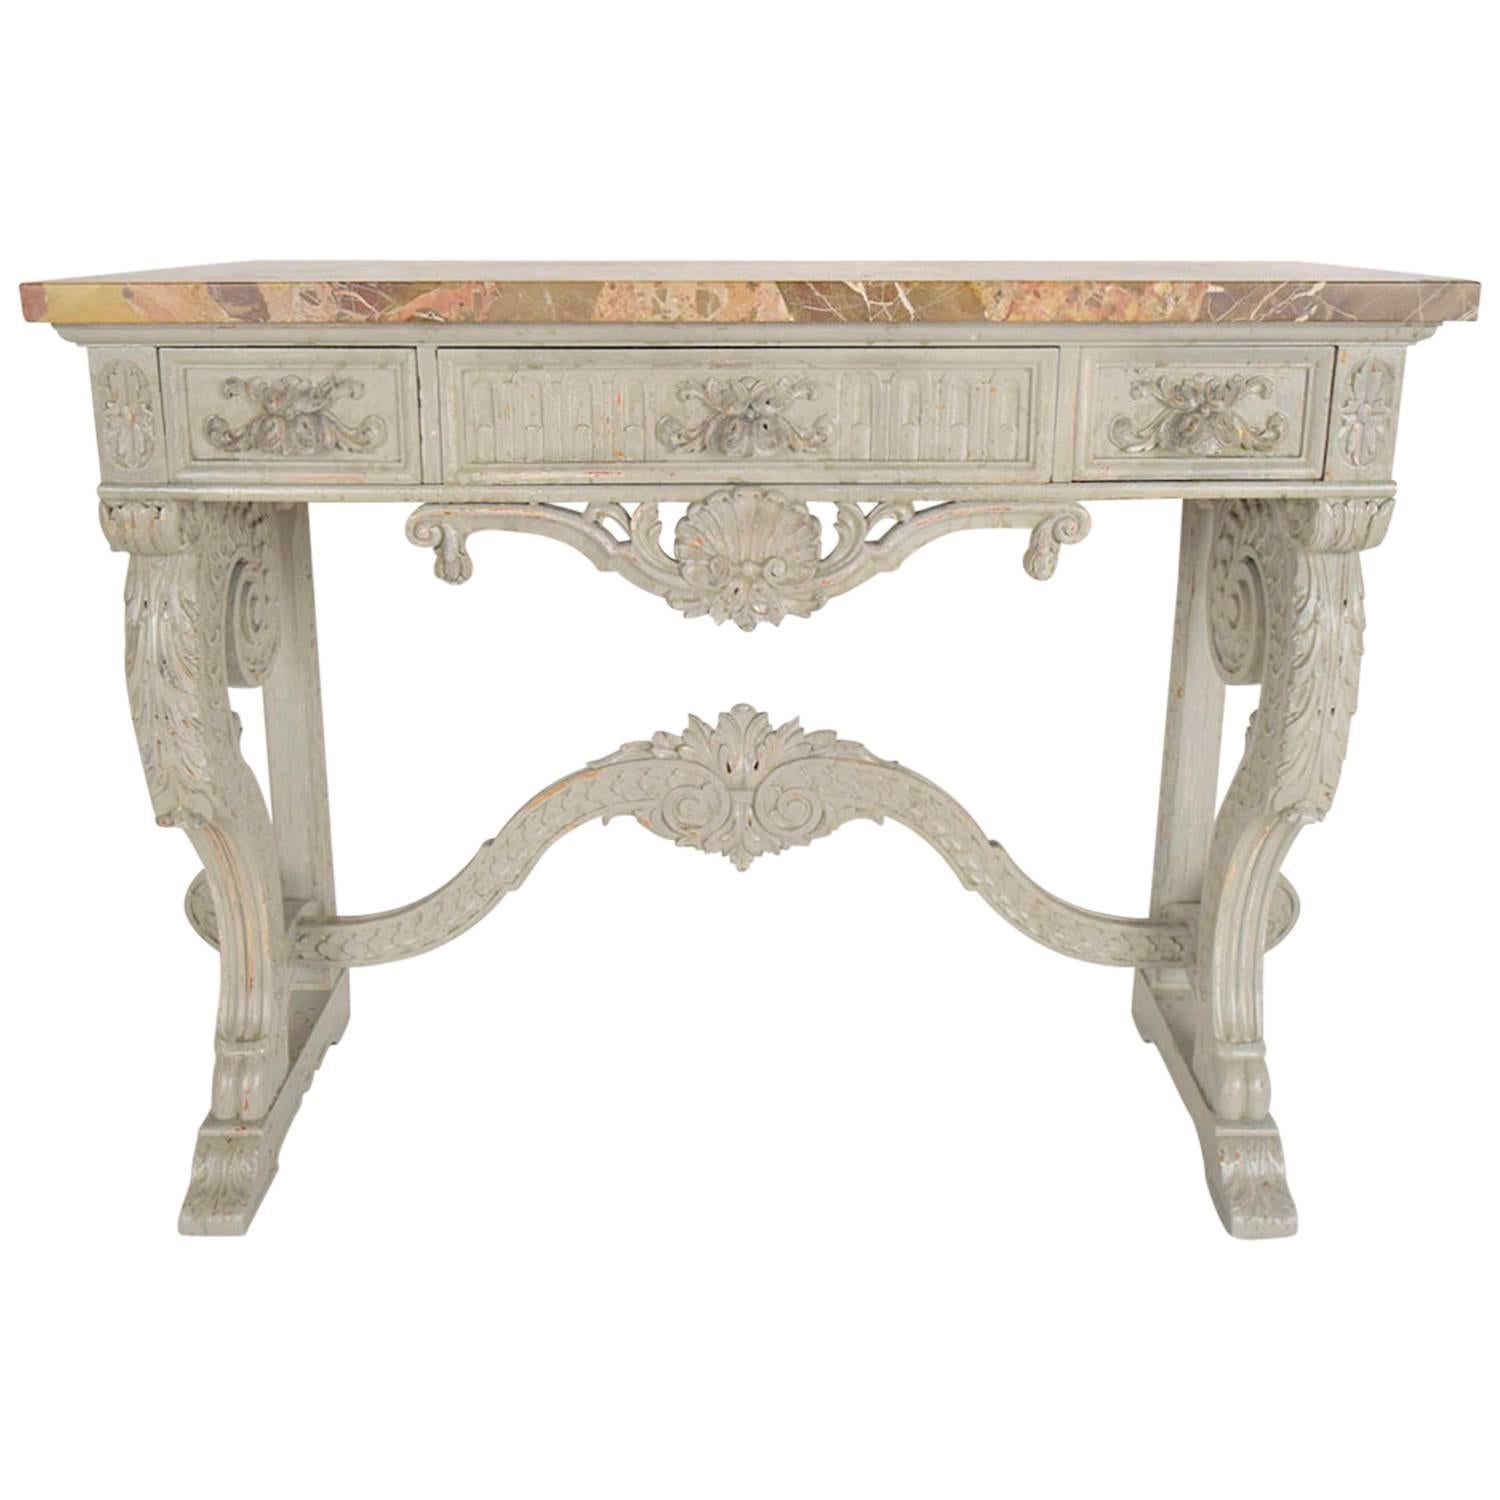 Late 19th Century Painted French Louis XVI Console with Marble Top